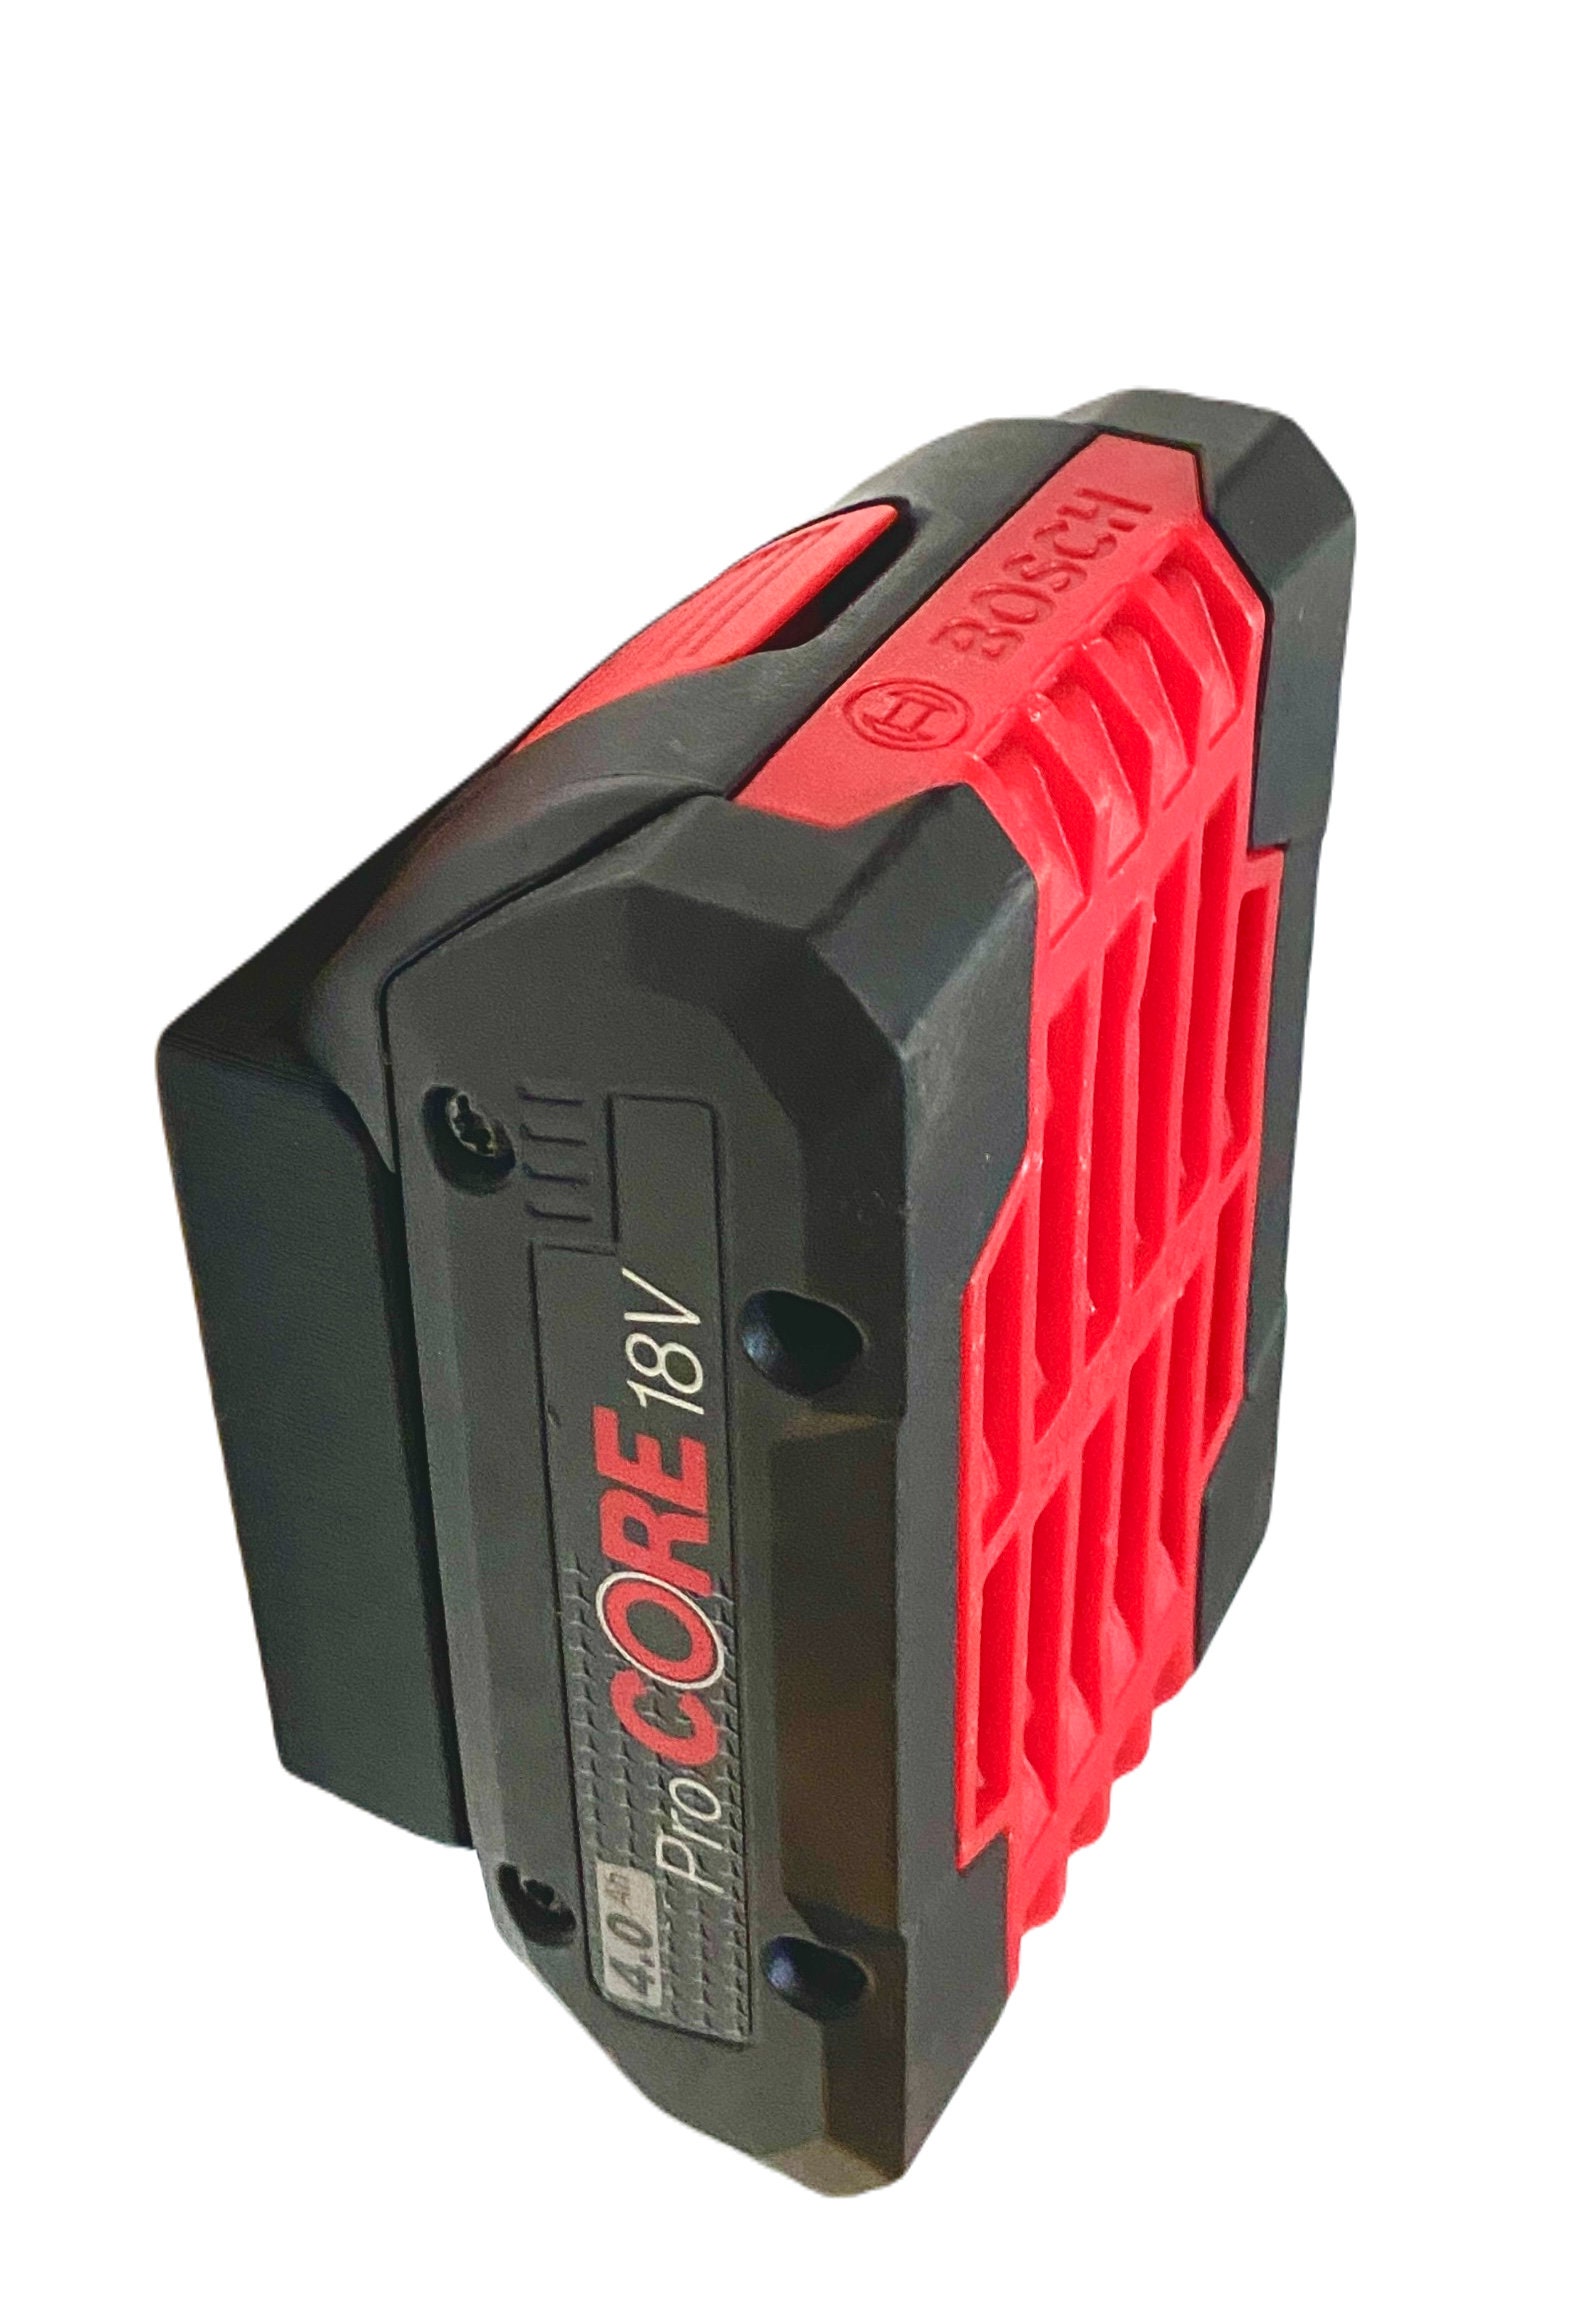 Bosch ProCORE 18V Battery - What is their Real Capacity? - PROCORE